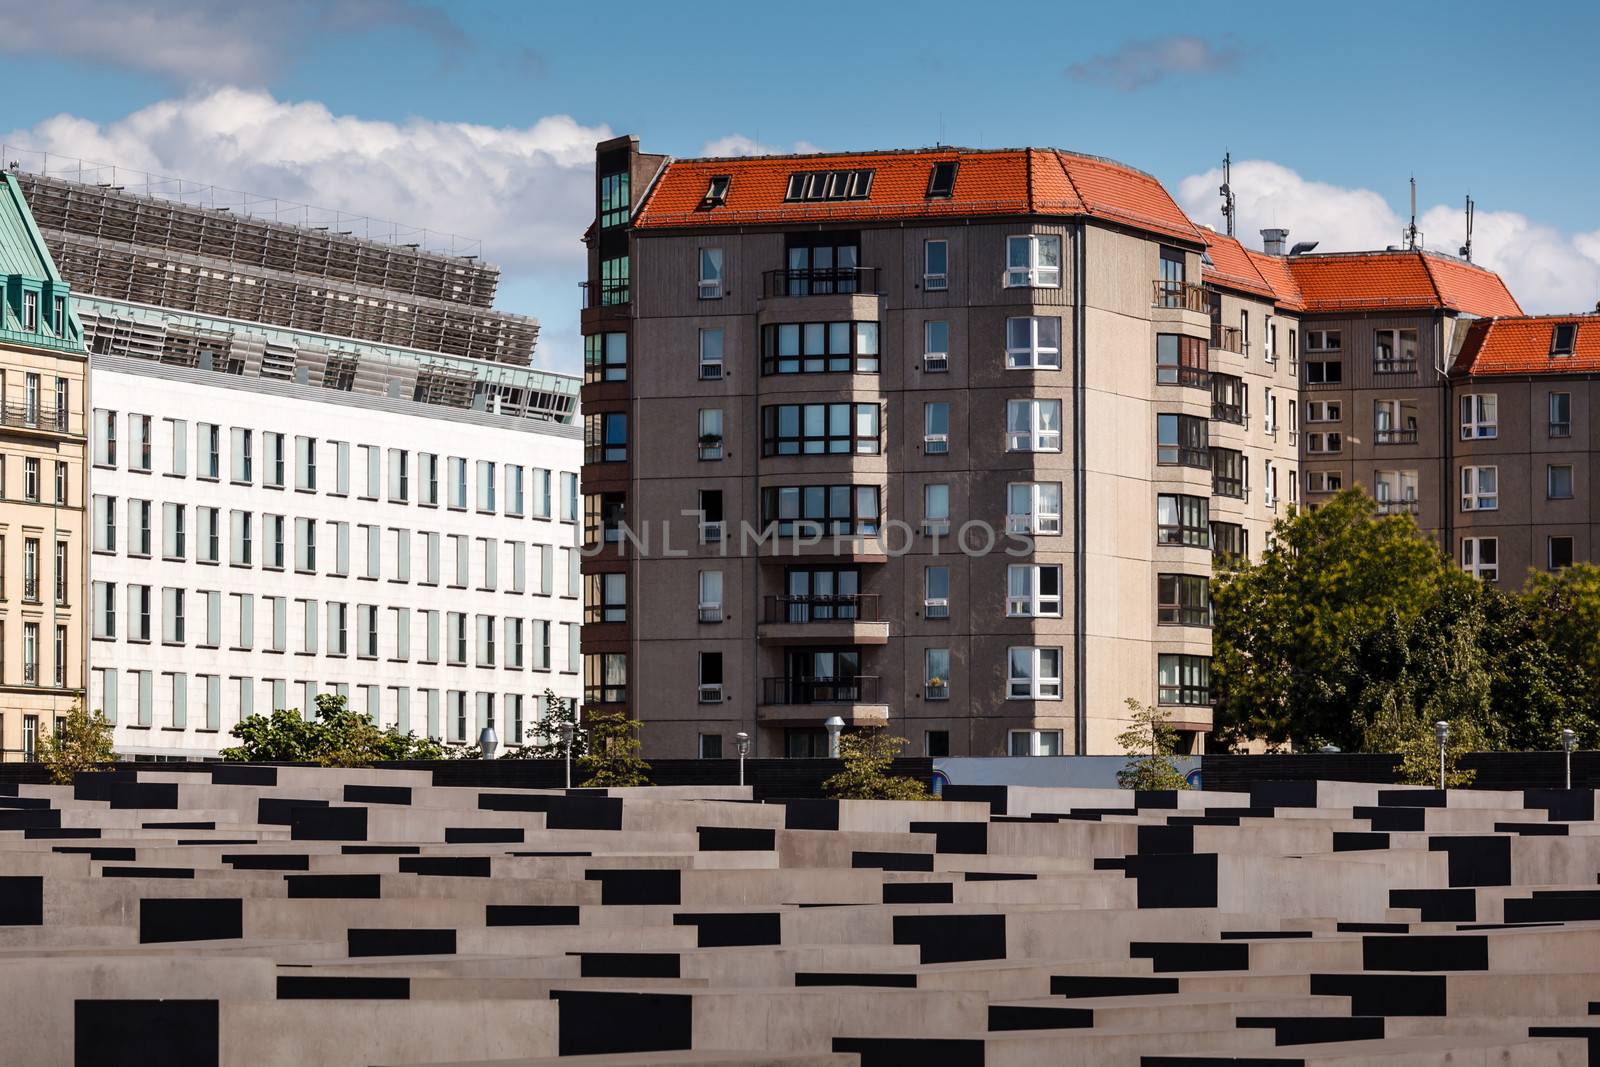 The Jewish Holocaust Memorial in Central Berlin, Germany by anshar